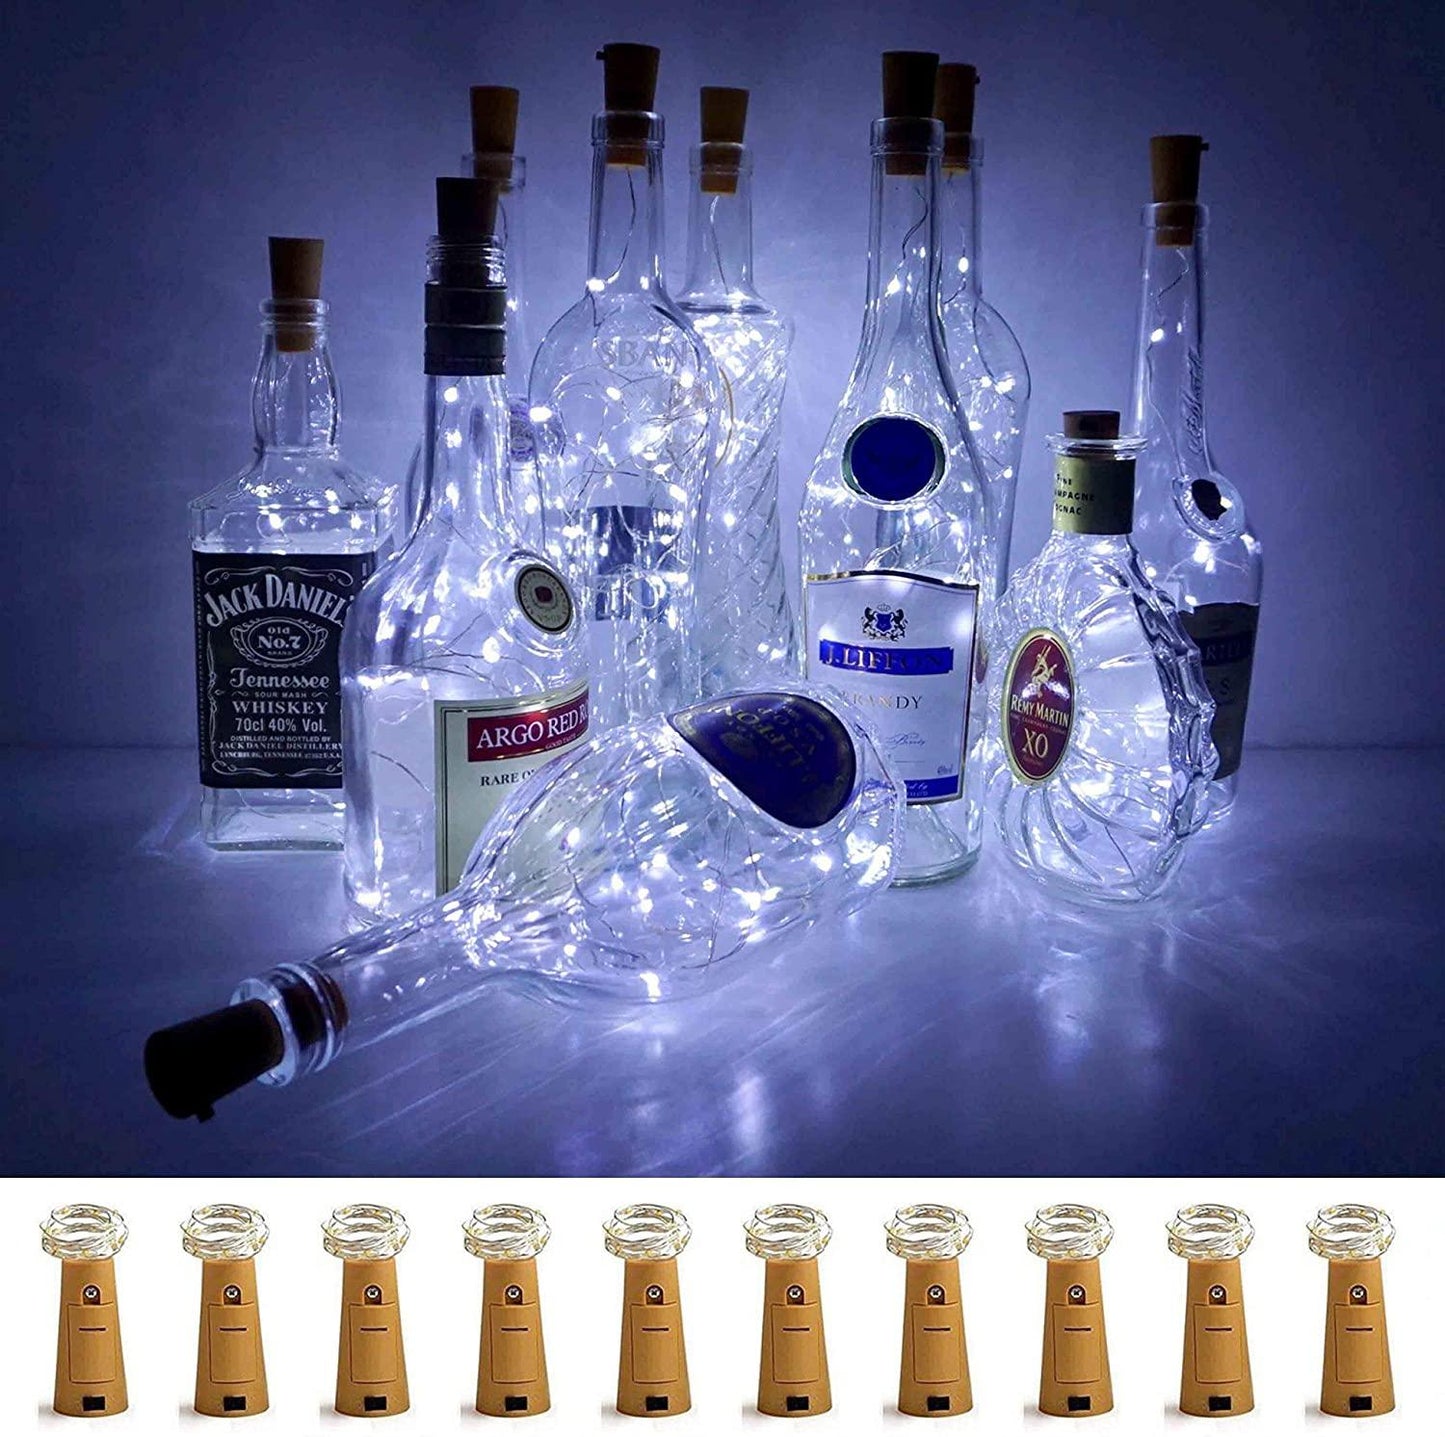 Wine Bottle Lights with Cork for DIY, Party, Decor, Christmas - If you say i do